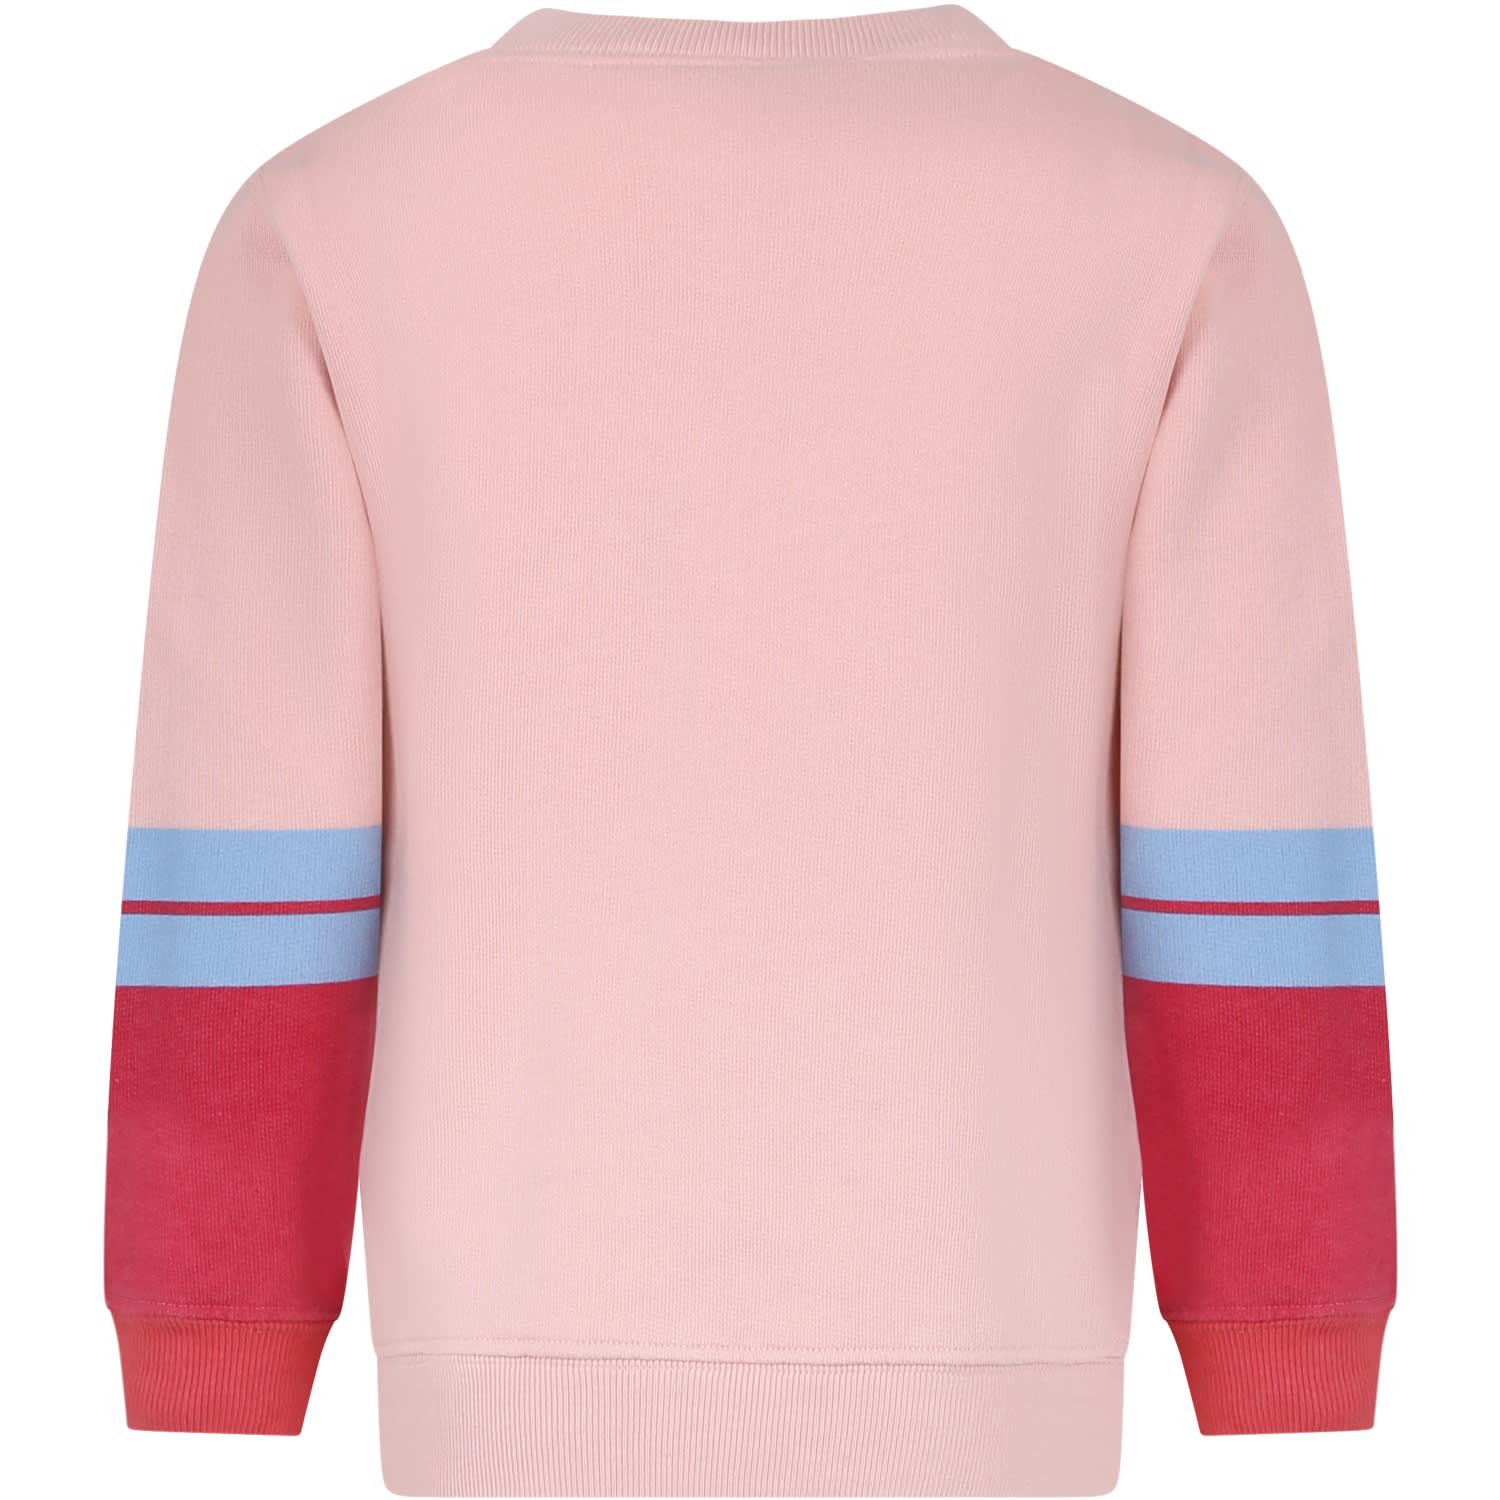 Shop Gucci Rose Sweatshirt For Girl With Logo In Pink